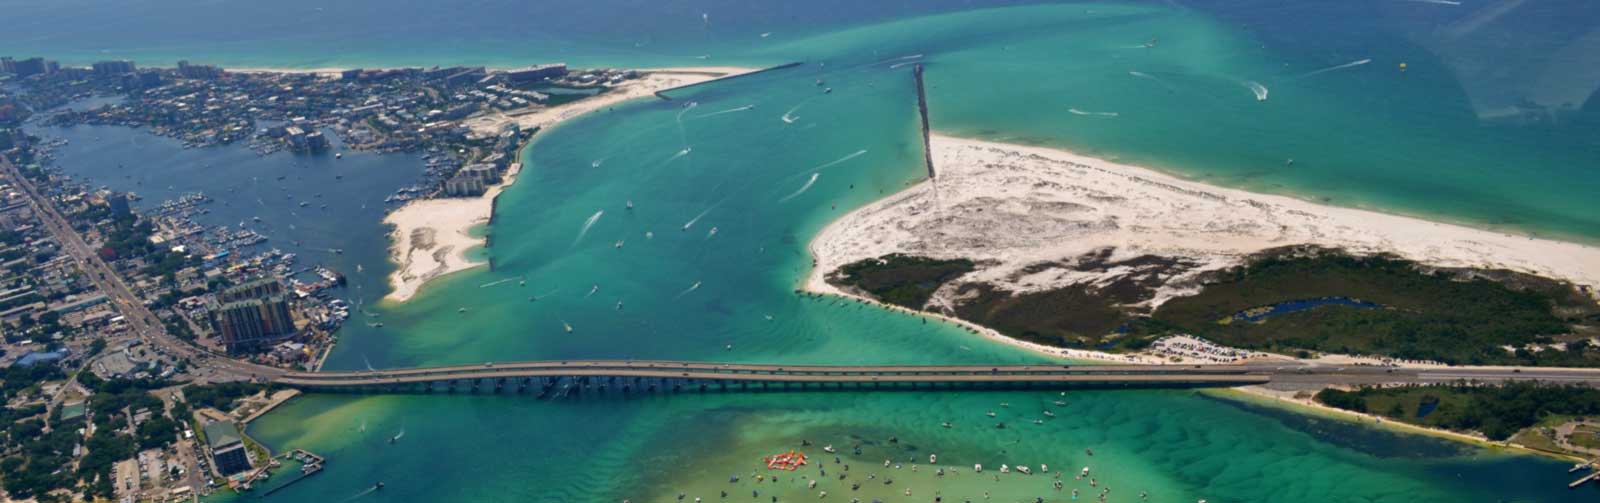 View of Destin from a Helicopter